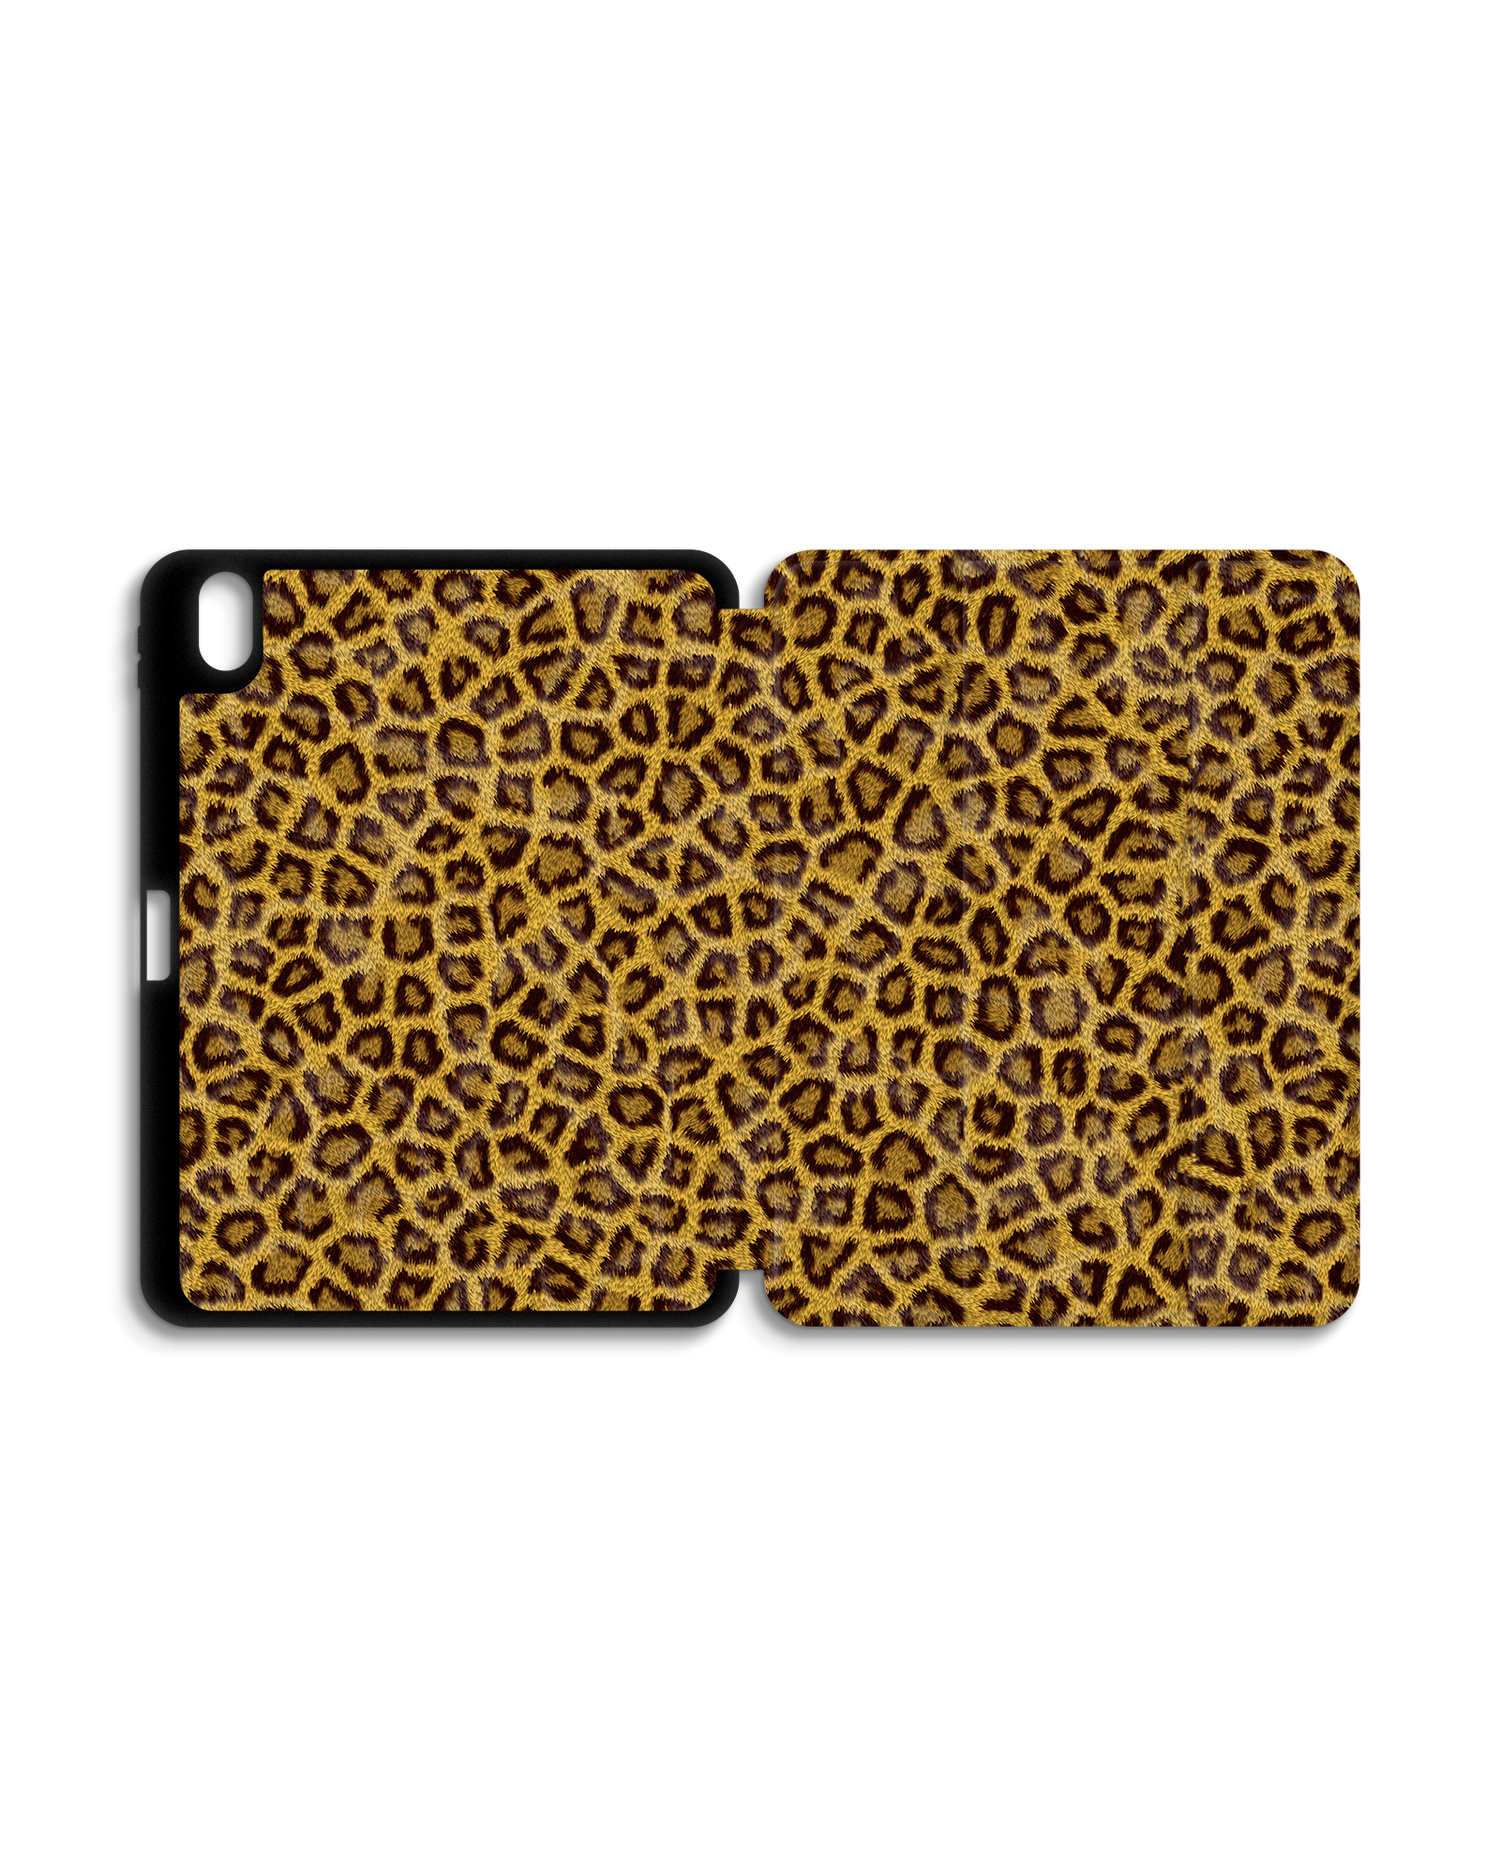 Leopard Skin iPad Case with Pencil Holder for Apple iPad (10th Generation): Opened exterior view